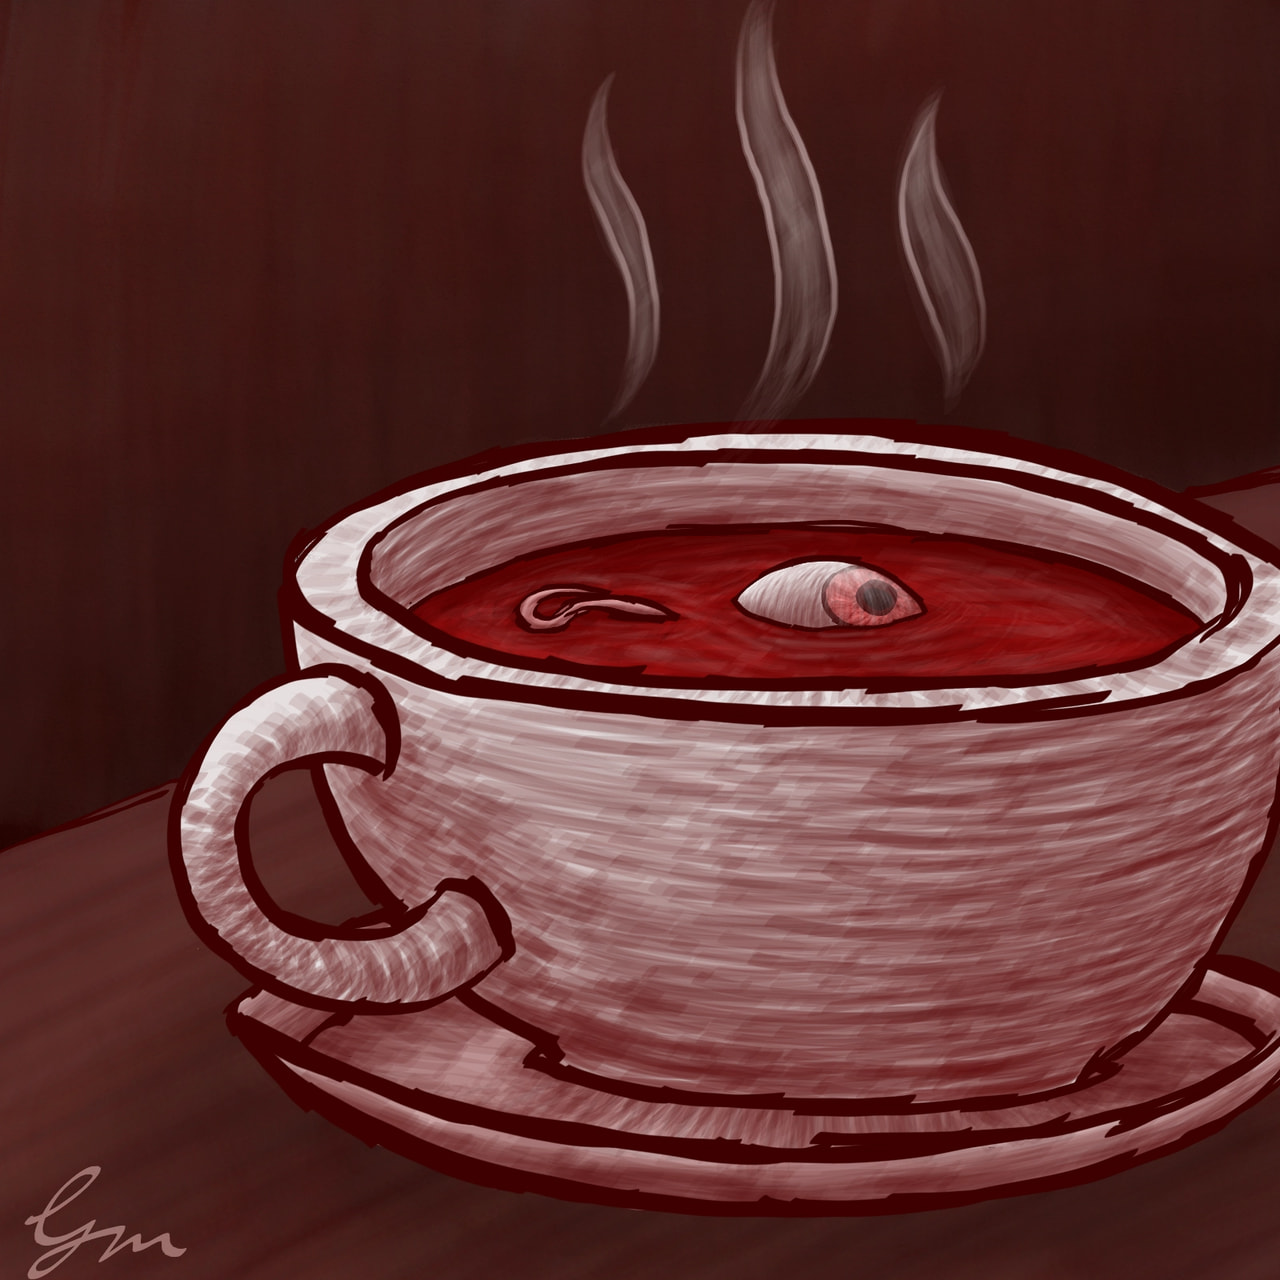 #redchallenge #colorweek ‪@sonysketch‬ I bet you know this moment, when you're out of ideas and draw an #eyeball floating in a cozy, warm cup of red "#tea". #mostcommonthingever!